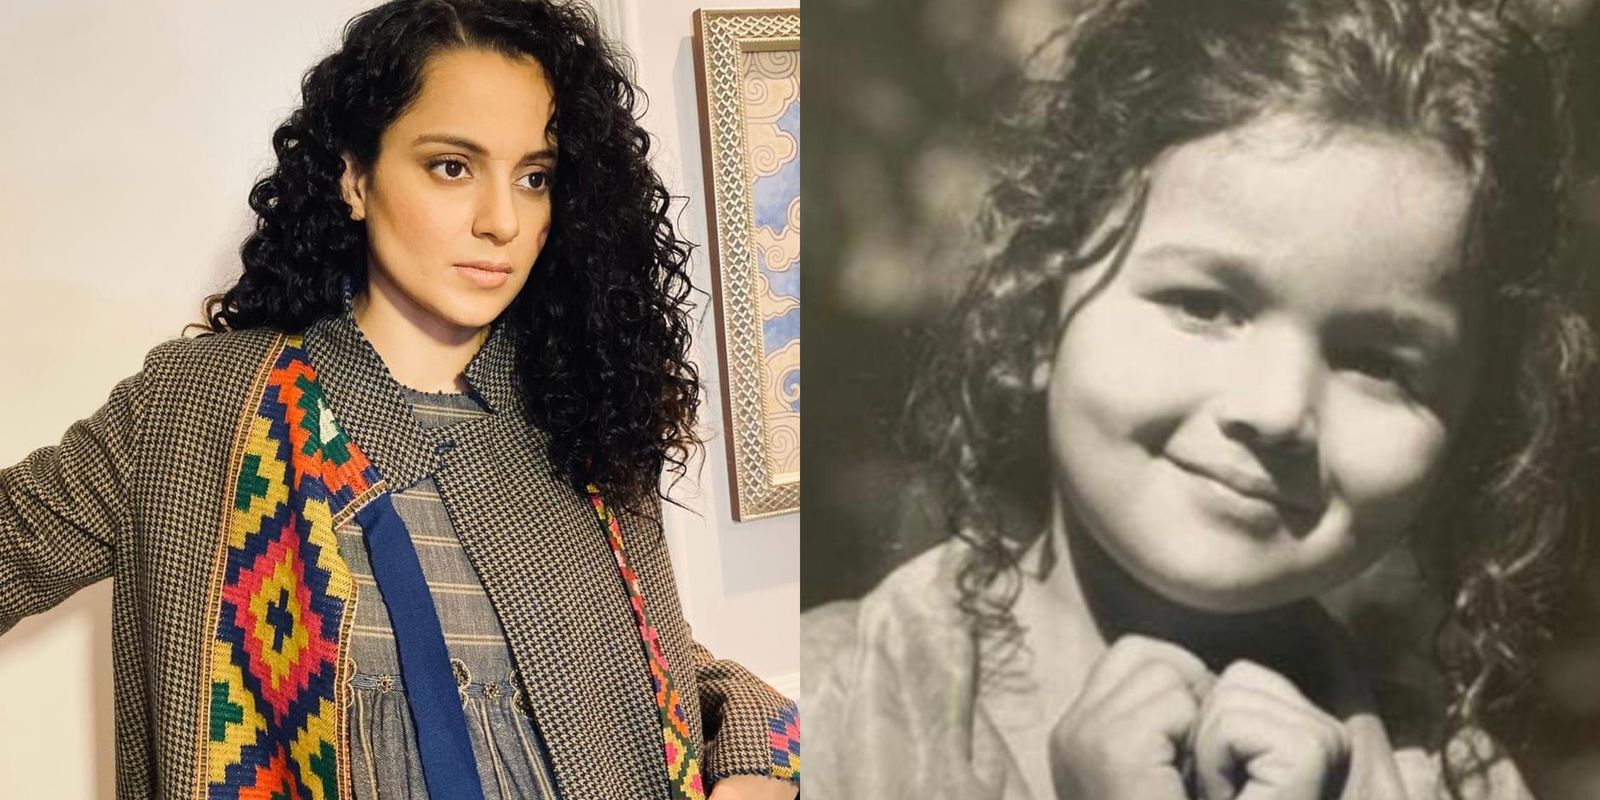 Kangana's Team Calls Alia Bhatt A 'Dumb 10th Fail Non Actor’, Say 'Wah Re Industry' As Popular Stars Comment On Her Photo